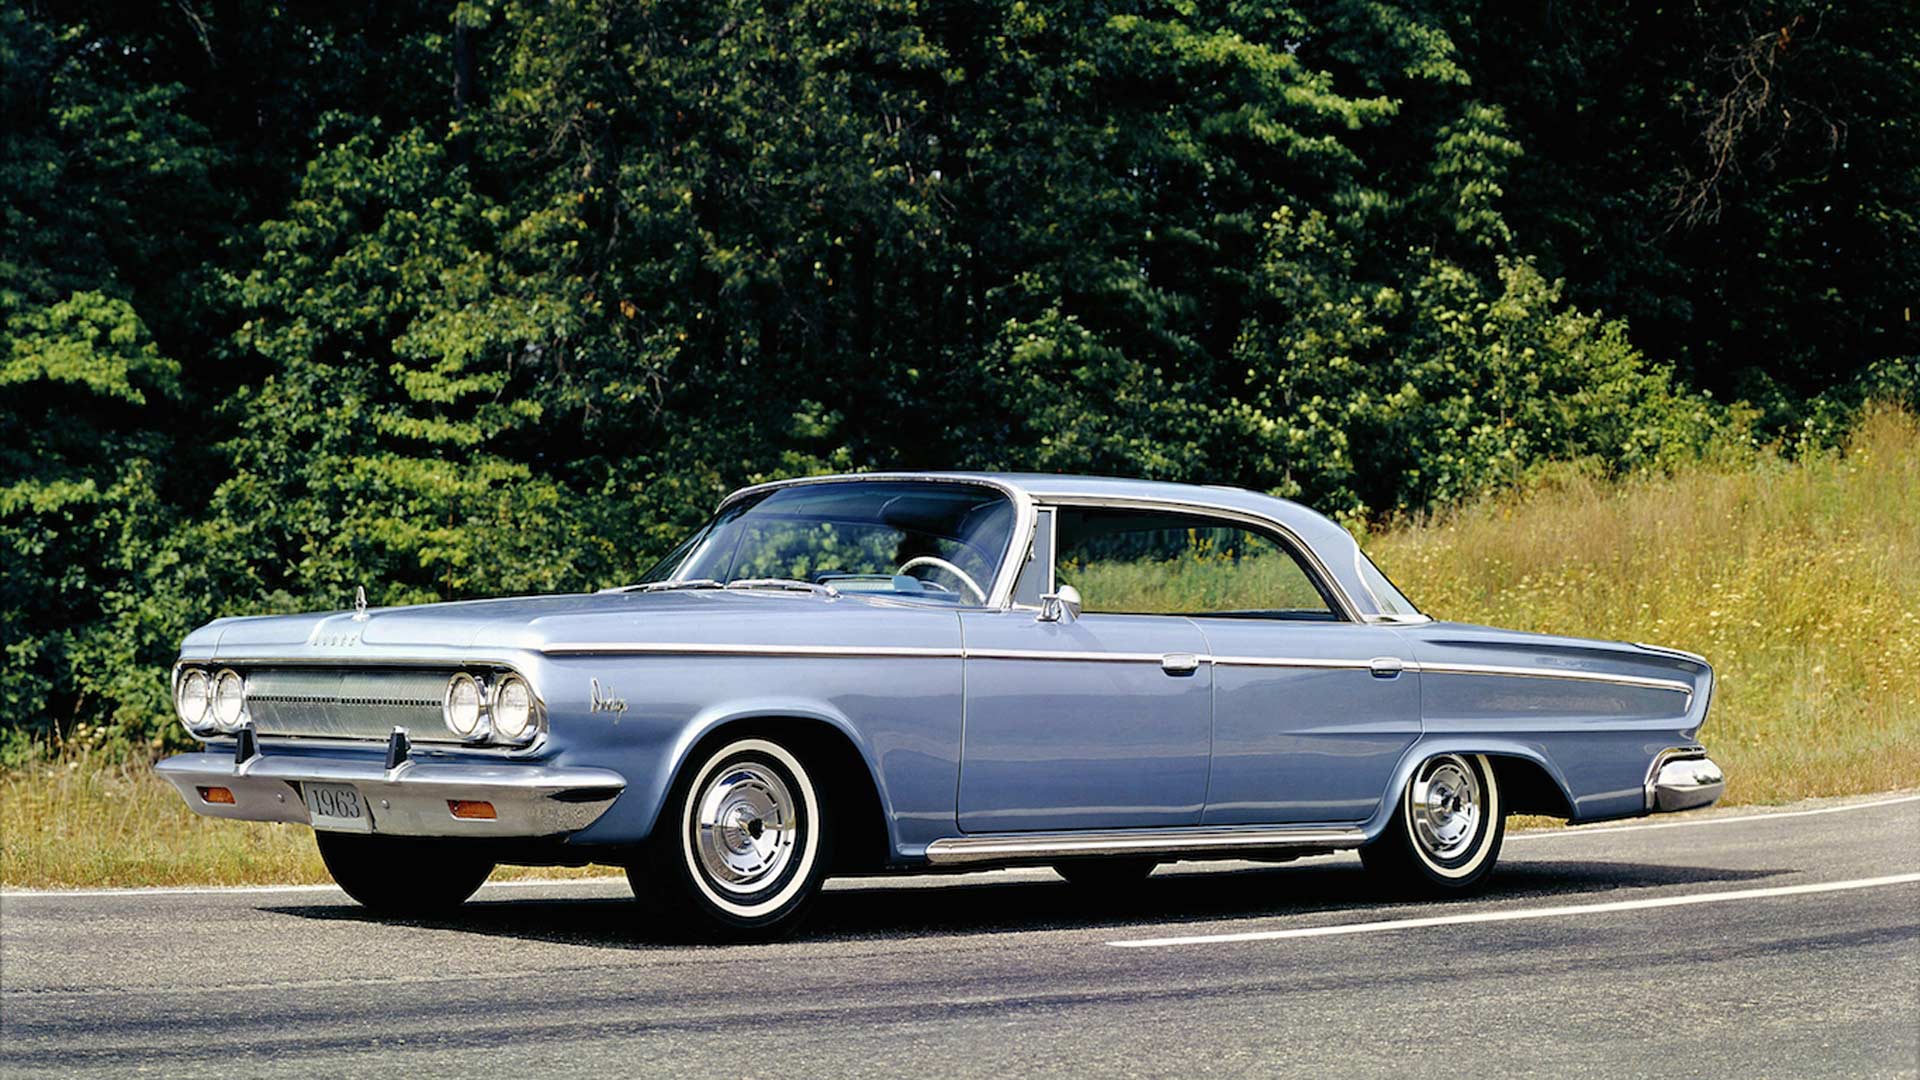 <p>Our first port of call is Dodge’s short-lived Custom 880. Although still a large vehicle by modern standards, the era of the land yachts was one where size really did matter. Under pressure to compete with Chevrolet, Dodge rushed out this as its own version of the Chrysler Newport.</p> <p>A 5.9-liter (361-cubic inch) V8 engine with 265hp was standard, with a 6.3-liter (383-ci) 305hp V8 optional. It wasn’t enough, though, and the 880 was dead in the water by 1965.</p>